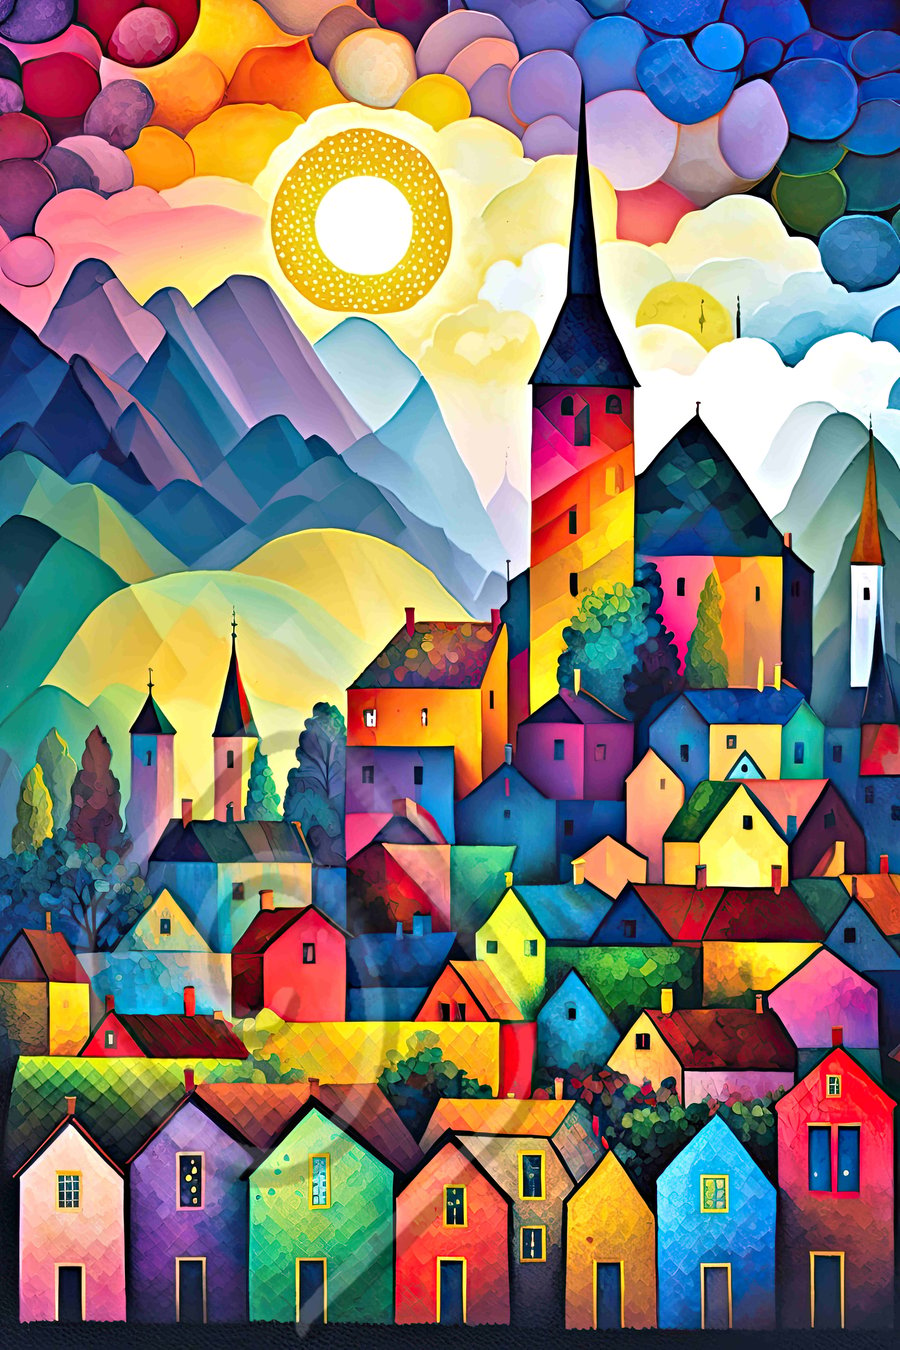 A2 giclee watercolour print of many colourful houses